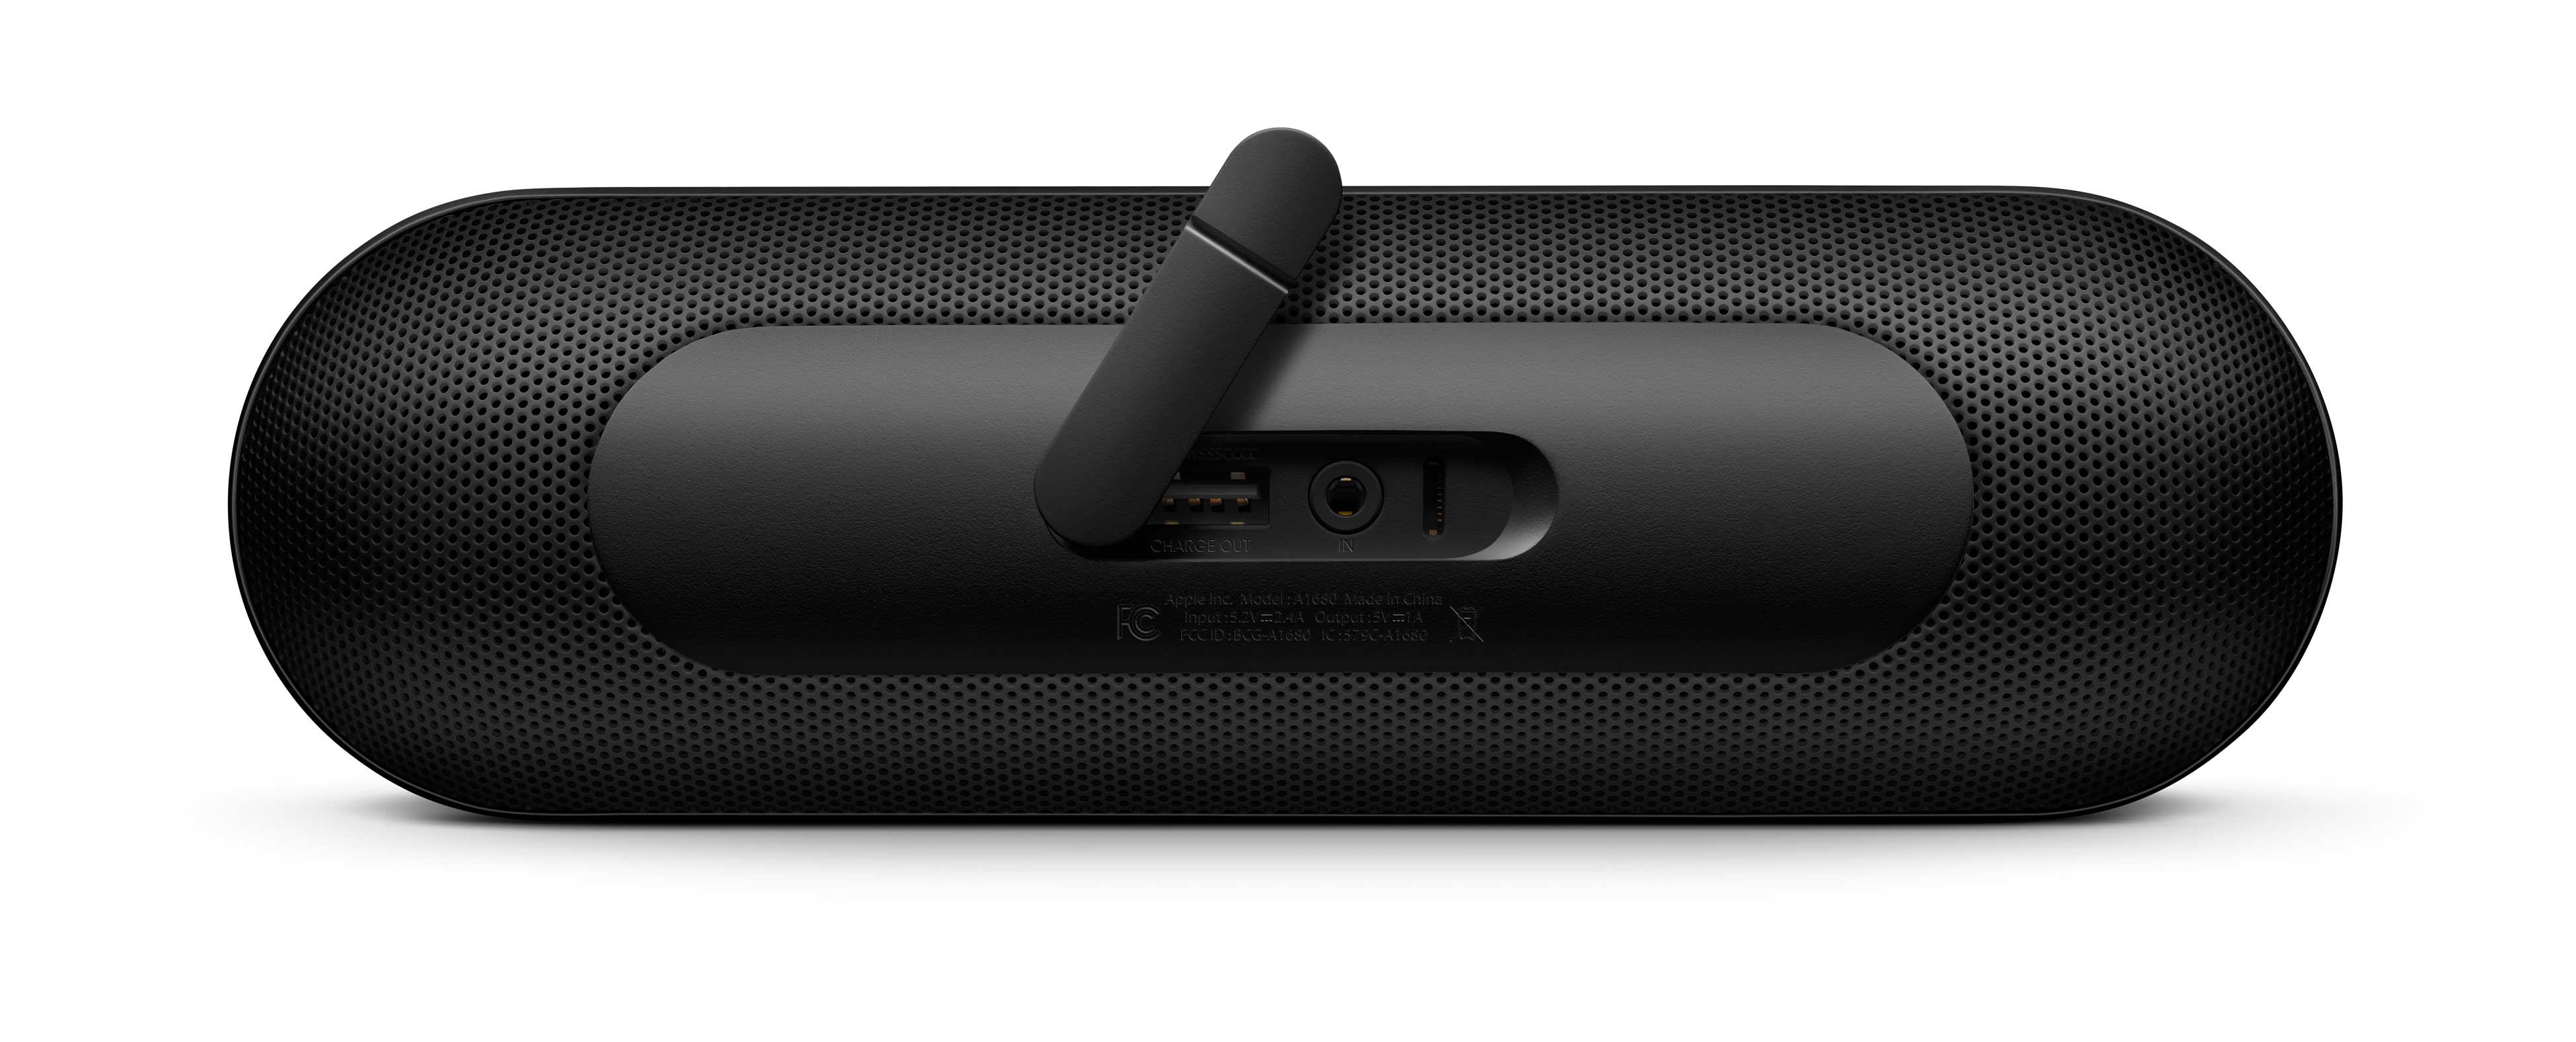 Beats by Dr. Dre Pill+ Portable Bluetooth Speaker, Black, ML4M2LL/A - image 8 of 10